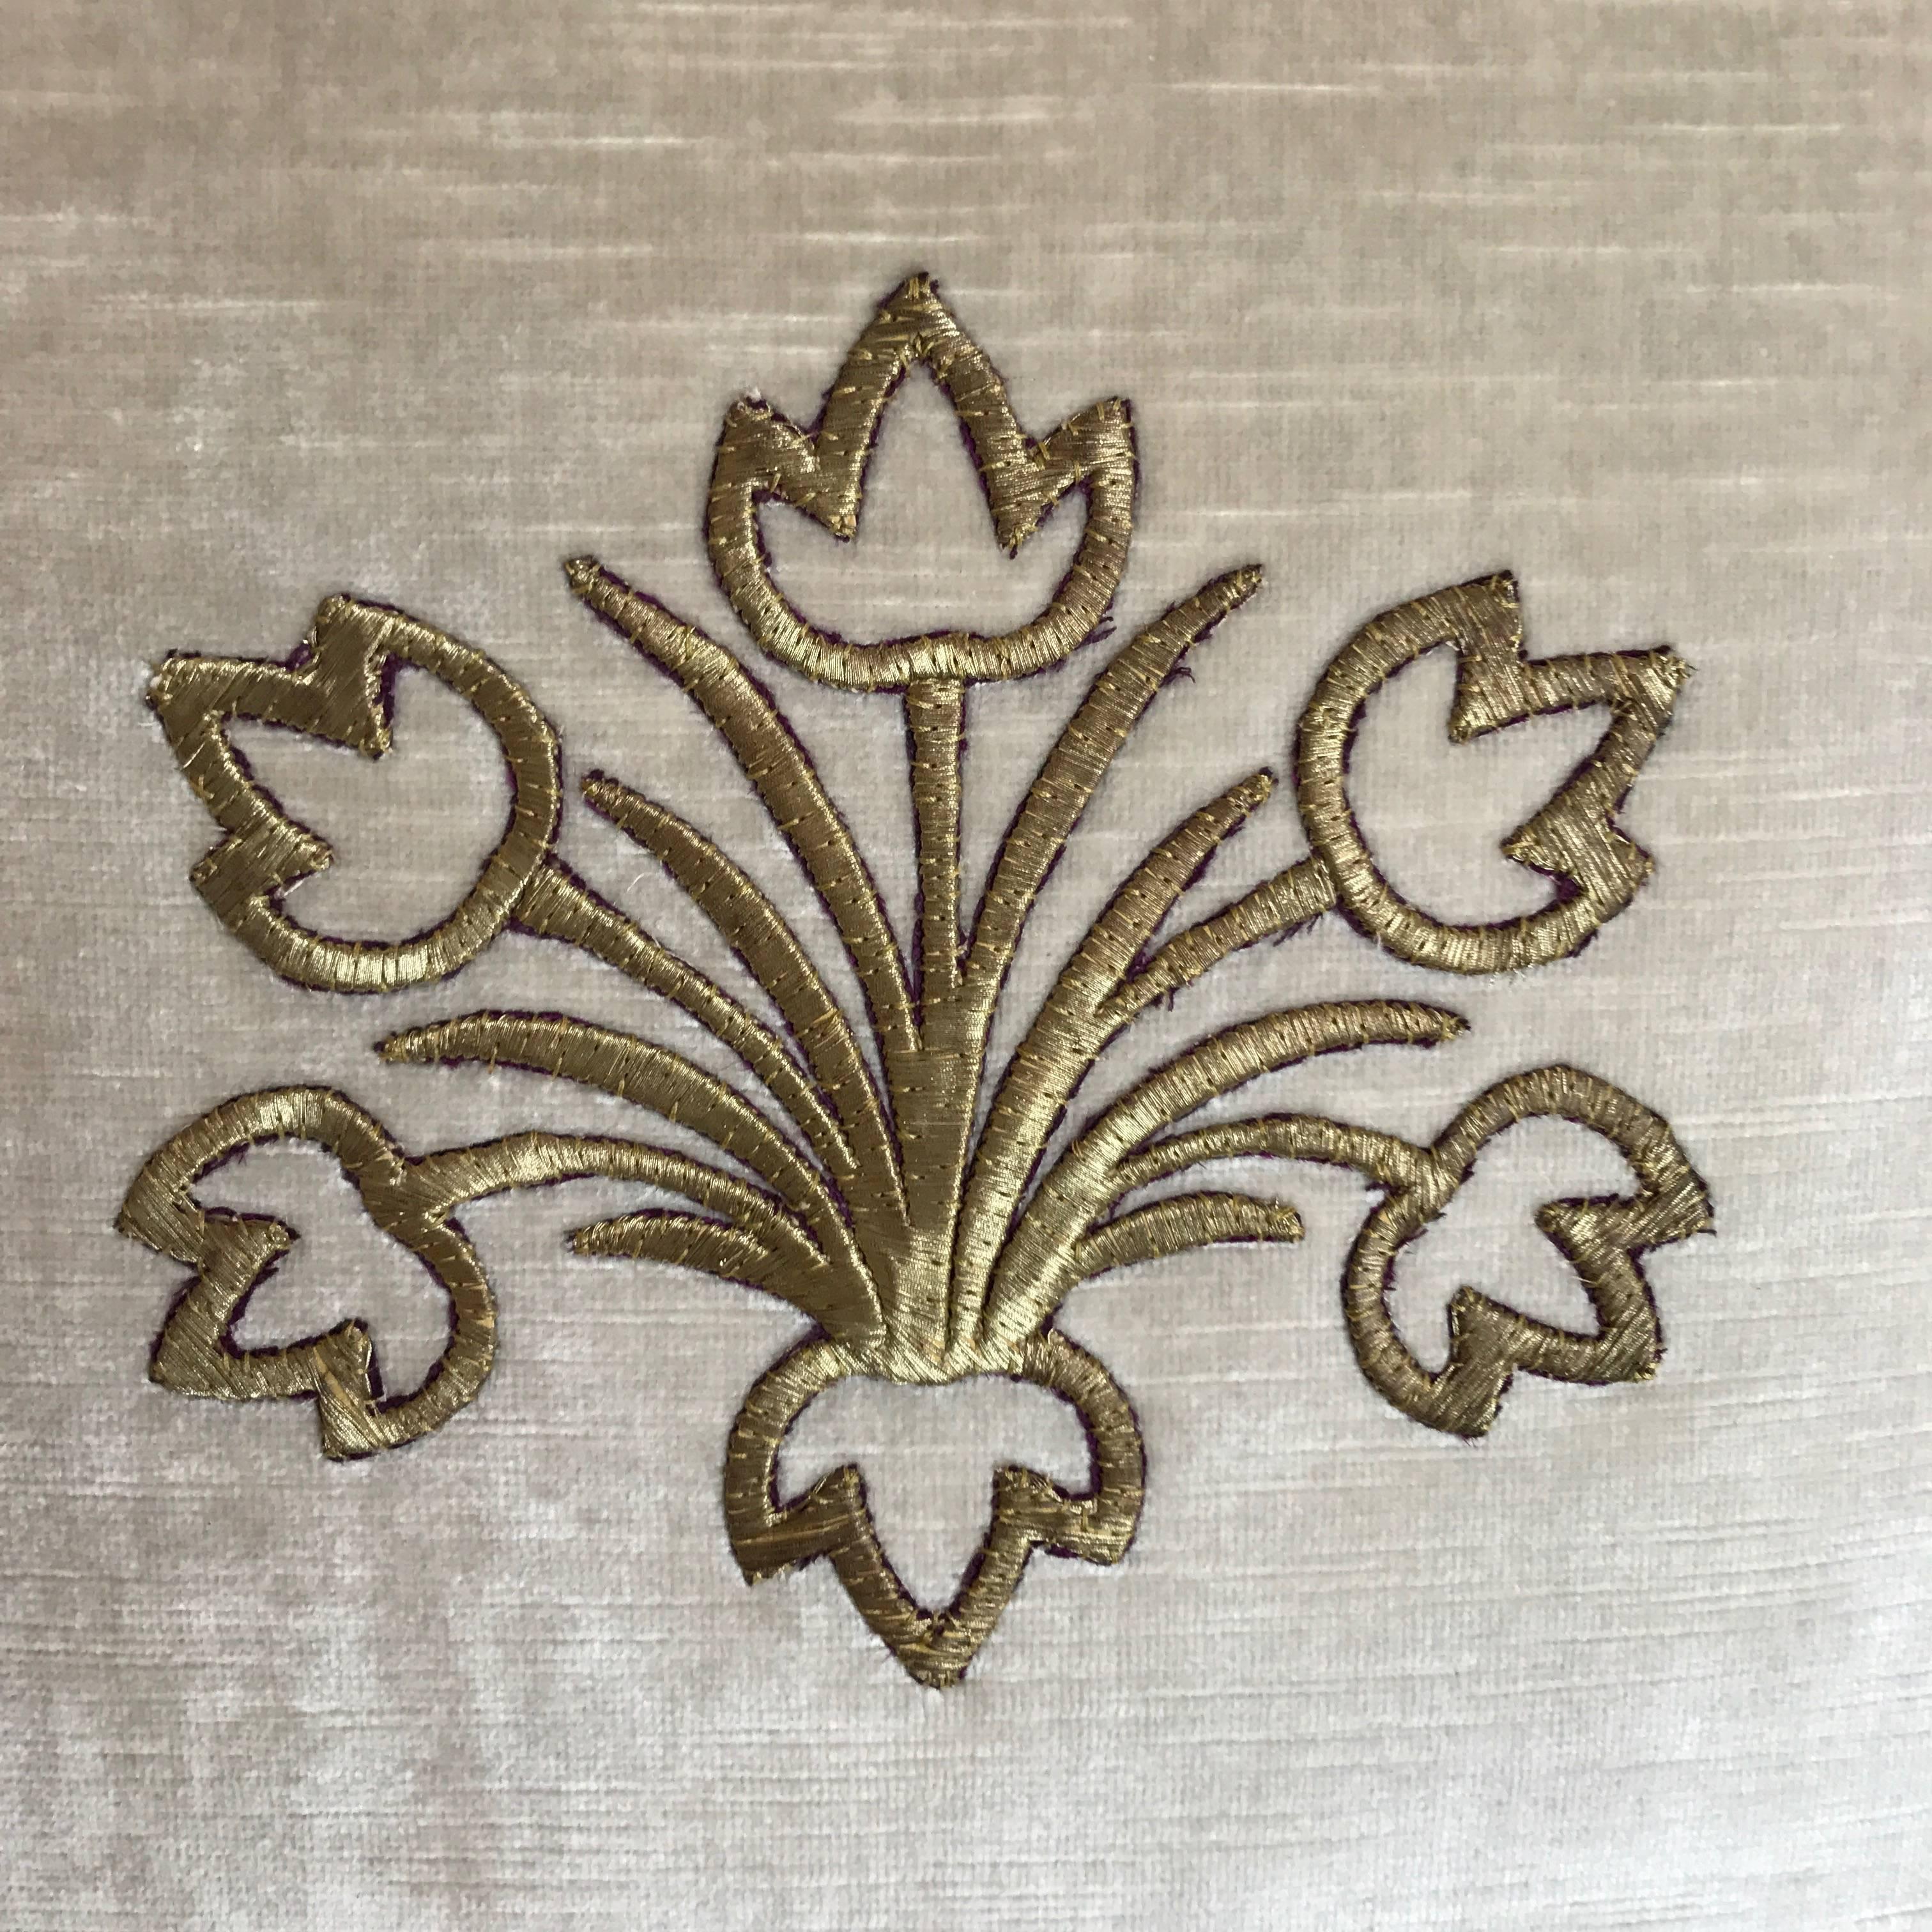 Antique Ottoman Empire raised gold metallic embroidery of a spray of tulips framed with antique gold metallic galon on oyster velvet. Hand trimmed with vintage gold metallic cording knotted in the corners. Down filled.